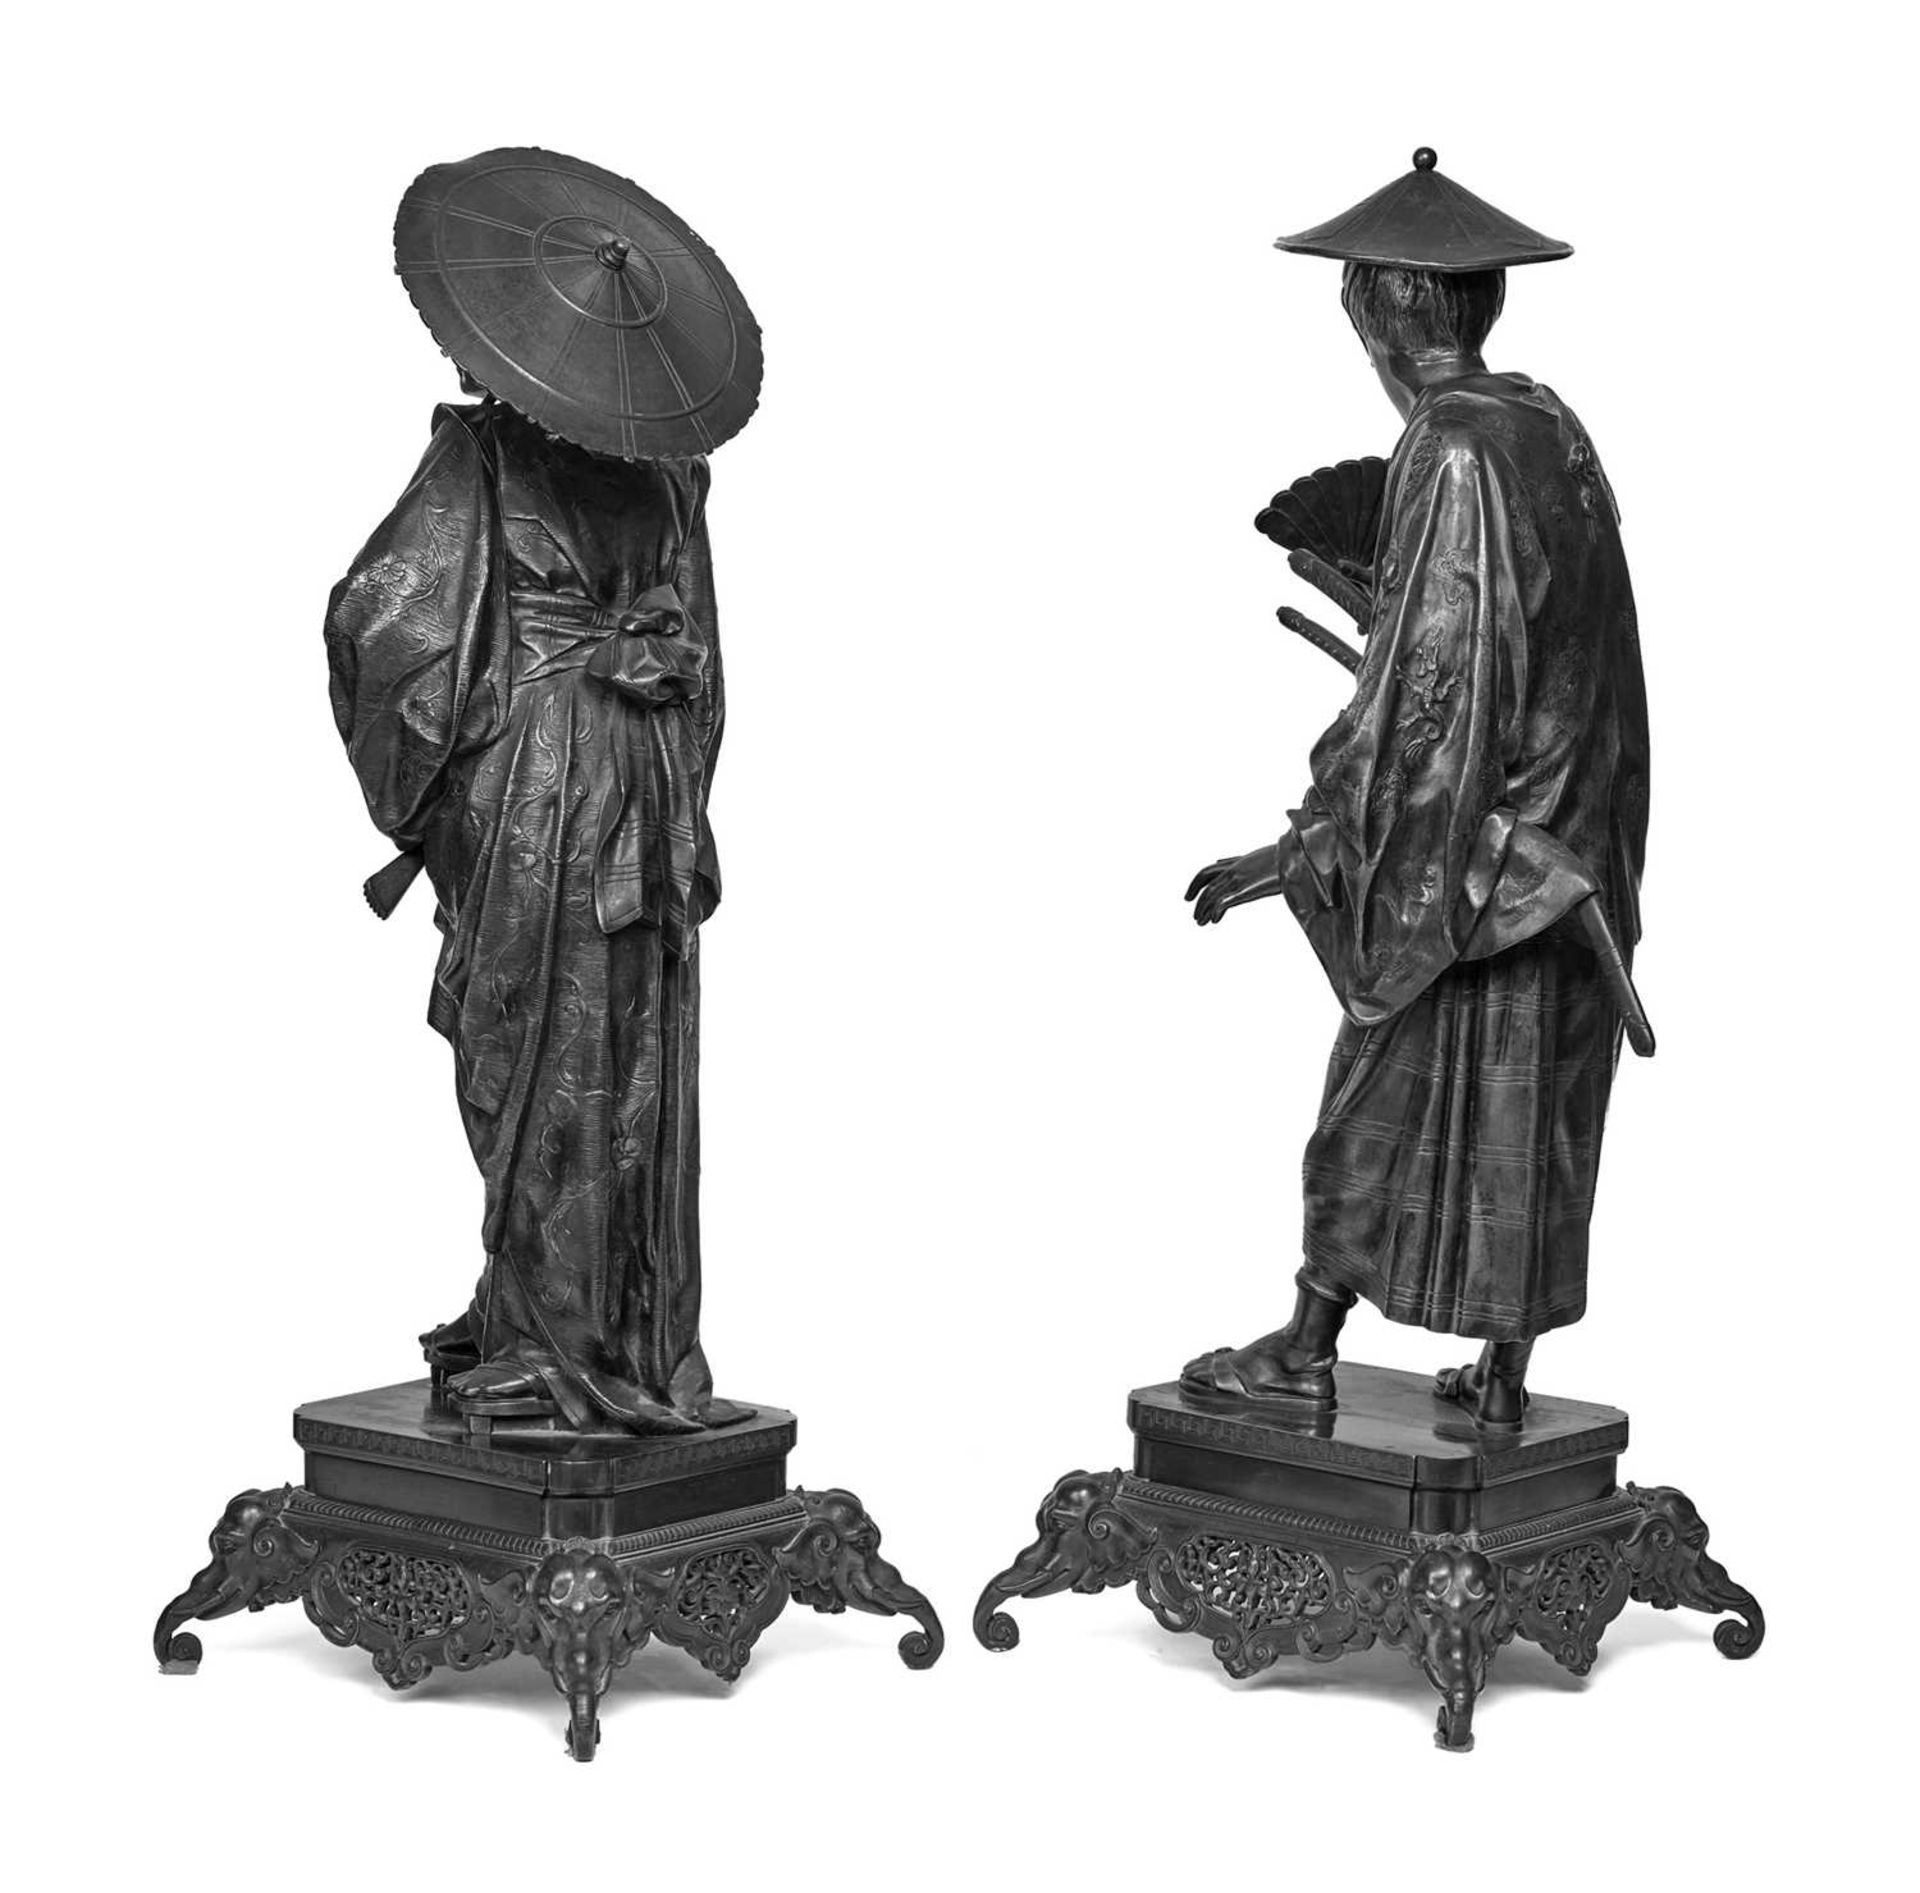 A FINE PAIR OF 19TH CENTURY FRENCH BRONZE 'JAPONISME' FIGURES - Image 4 of 4